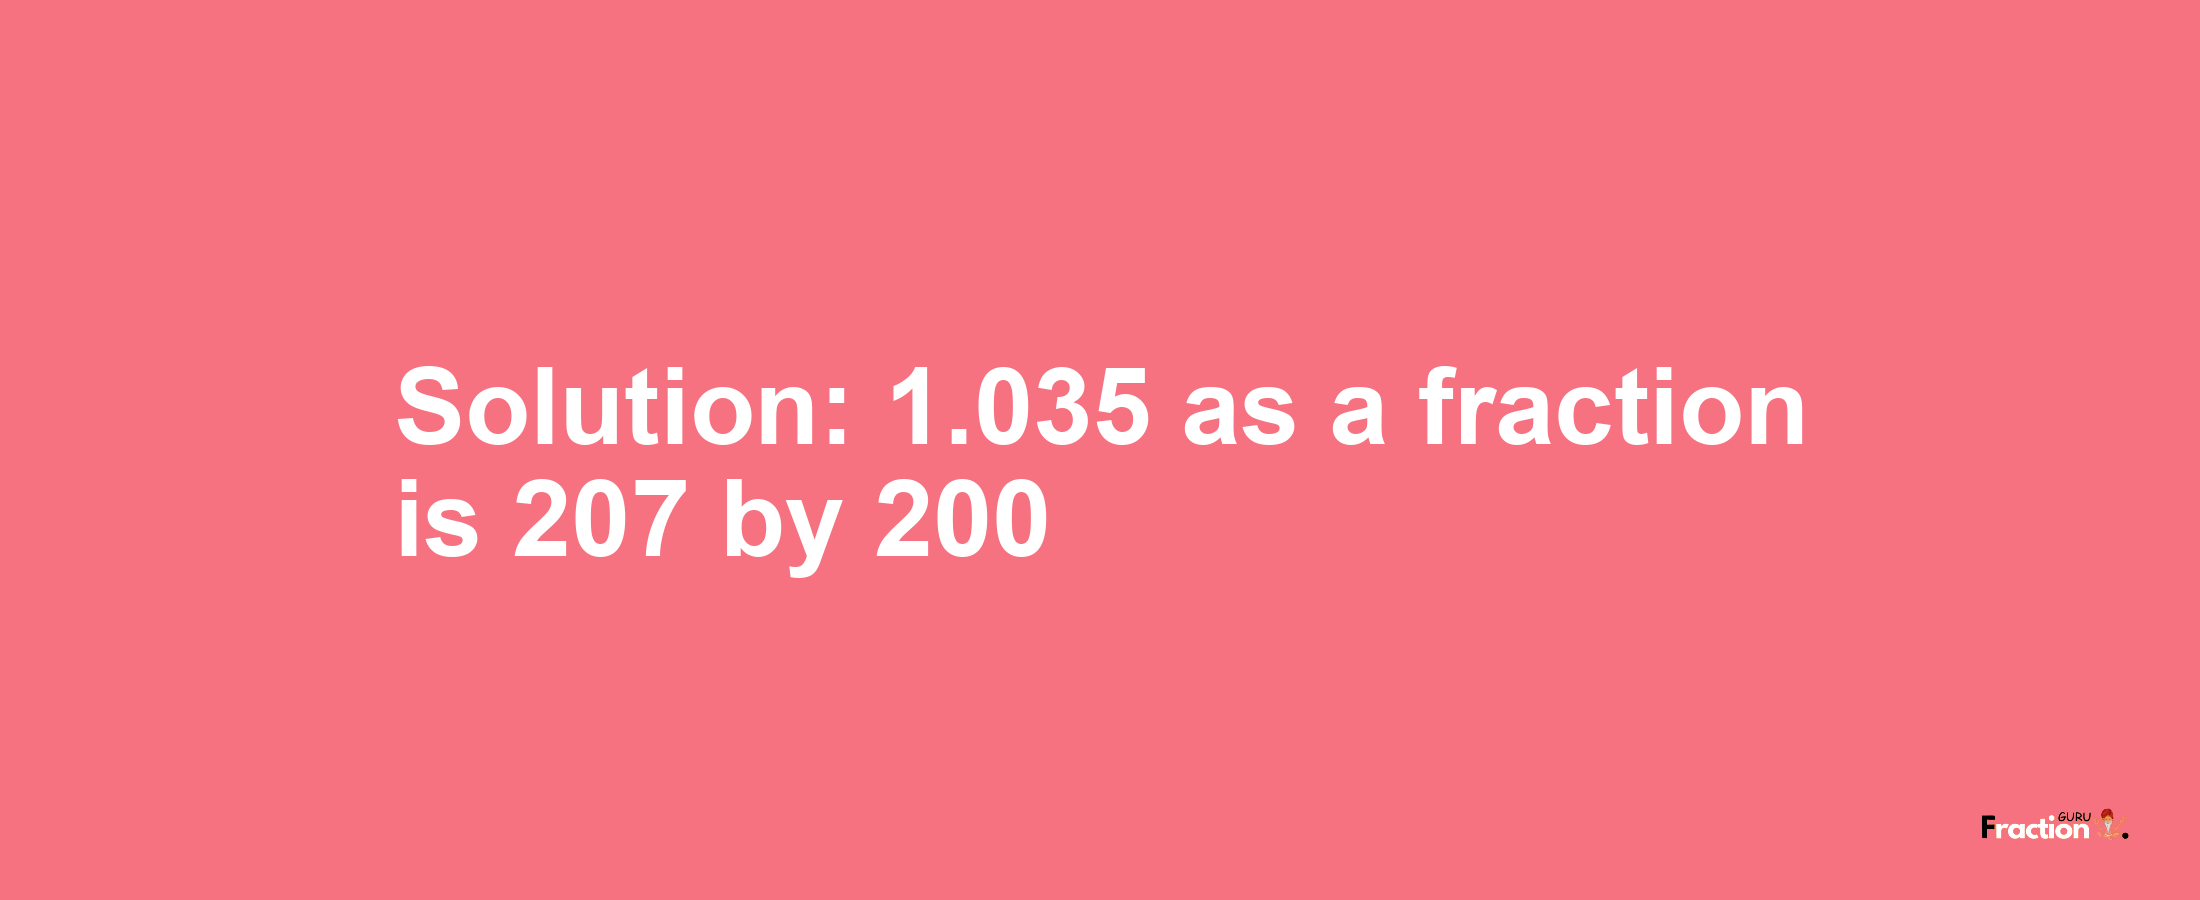 Solution:1.035 as a fraction is 207/200